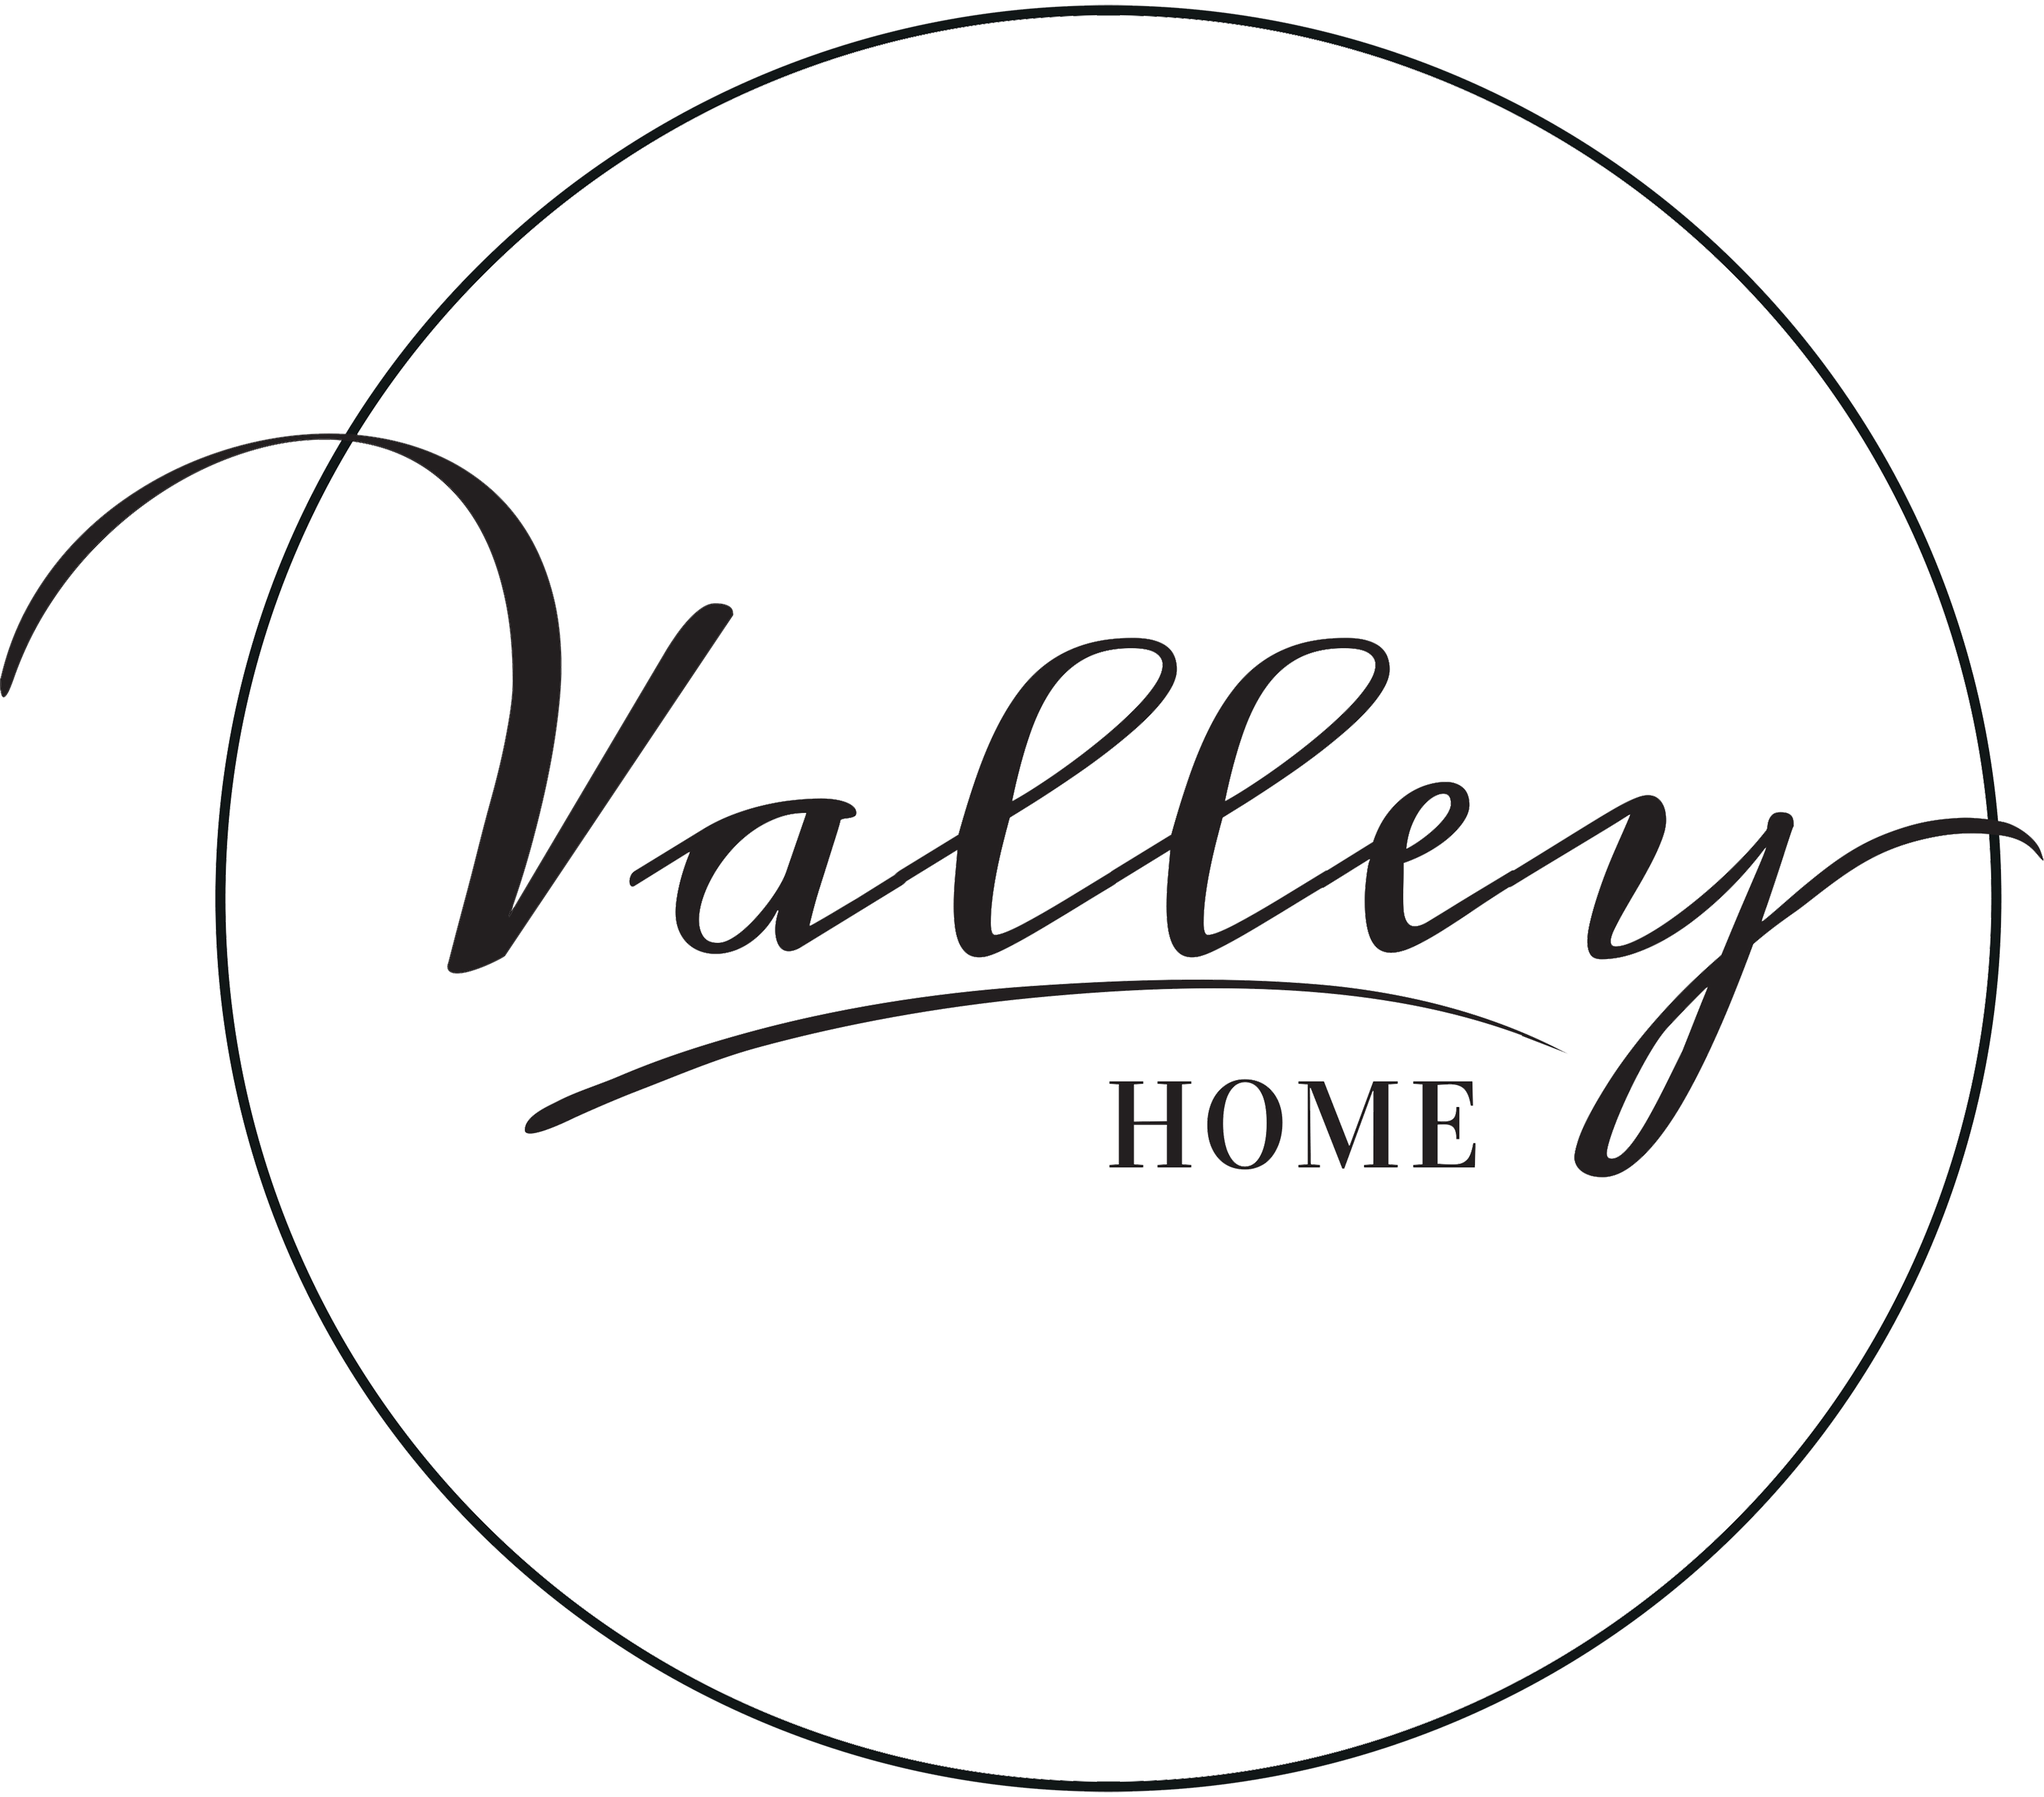 Valley Home